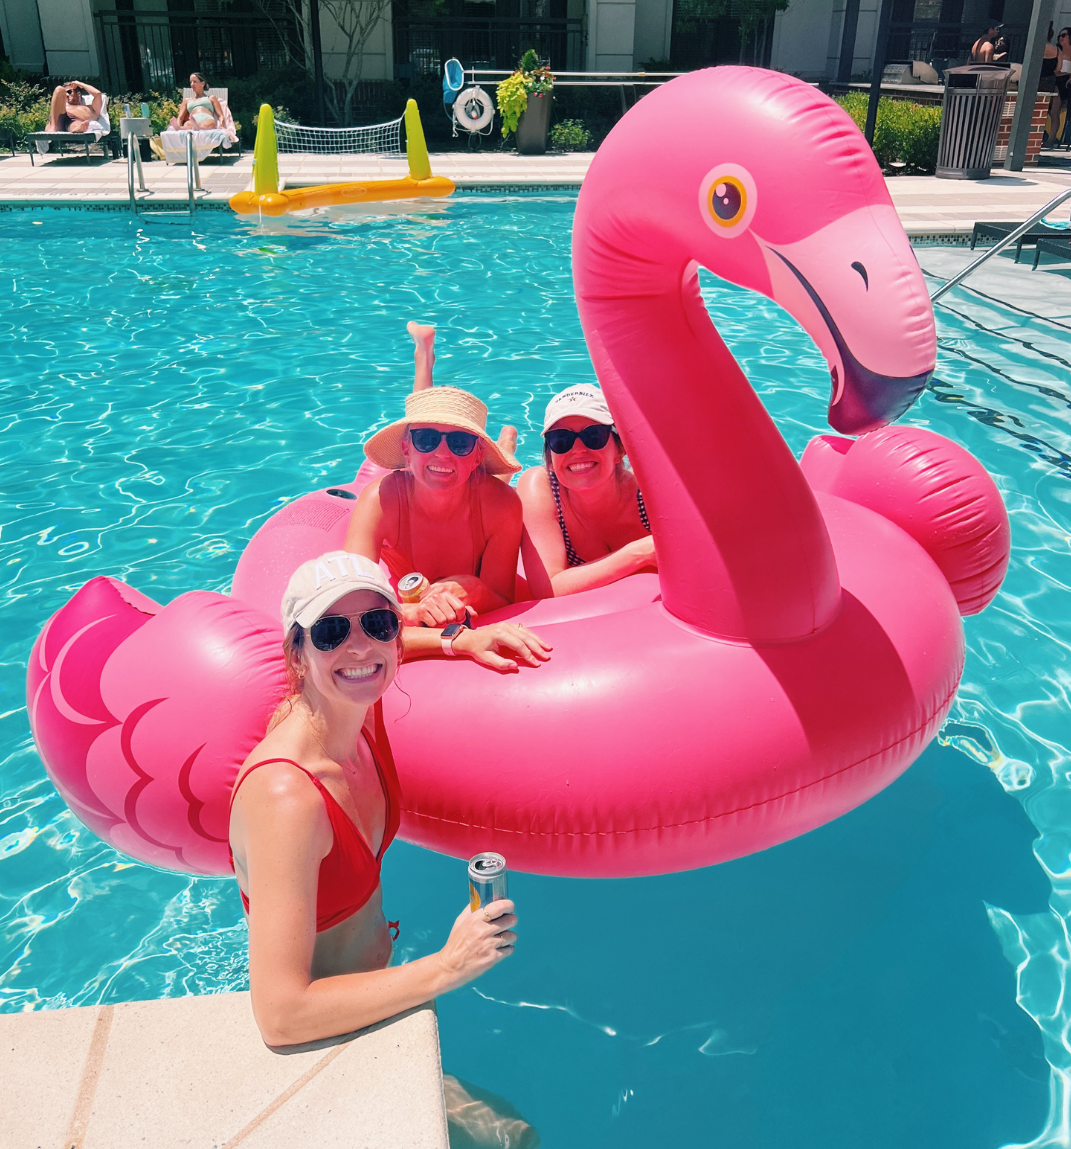 Let's Flamingle Pool Party